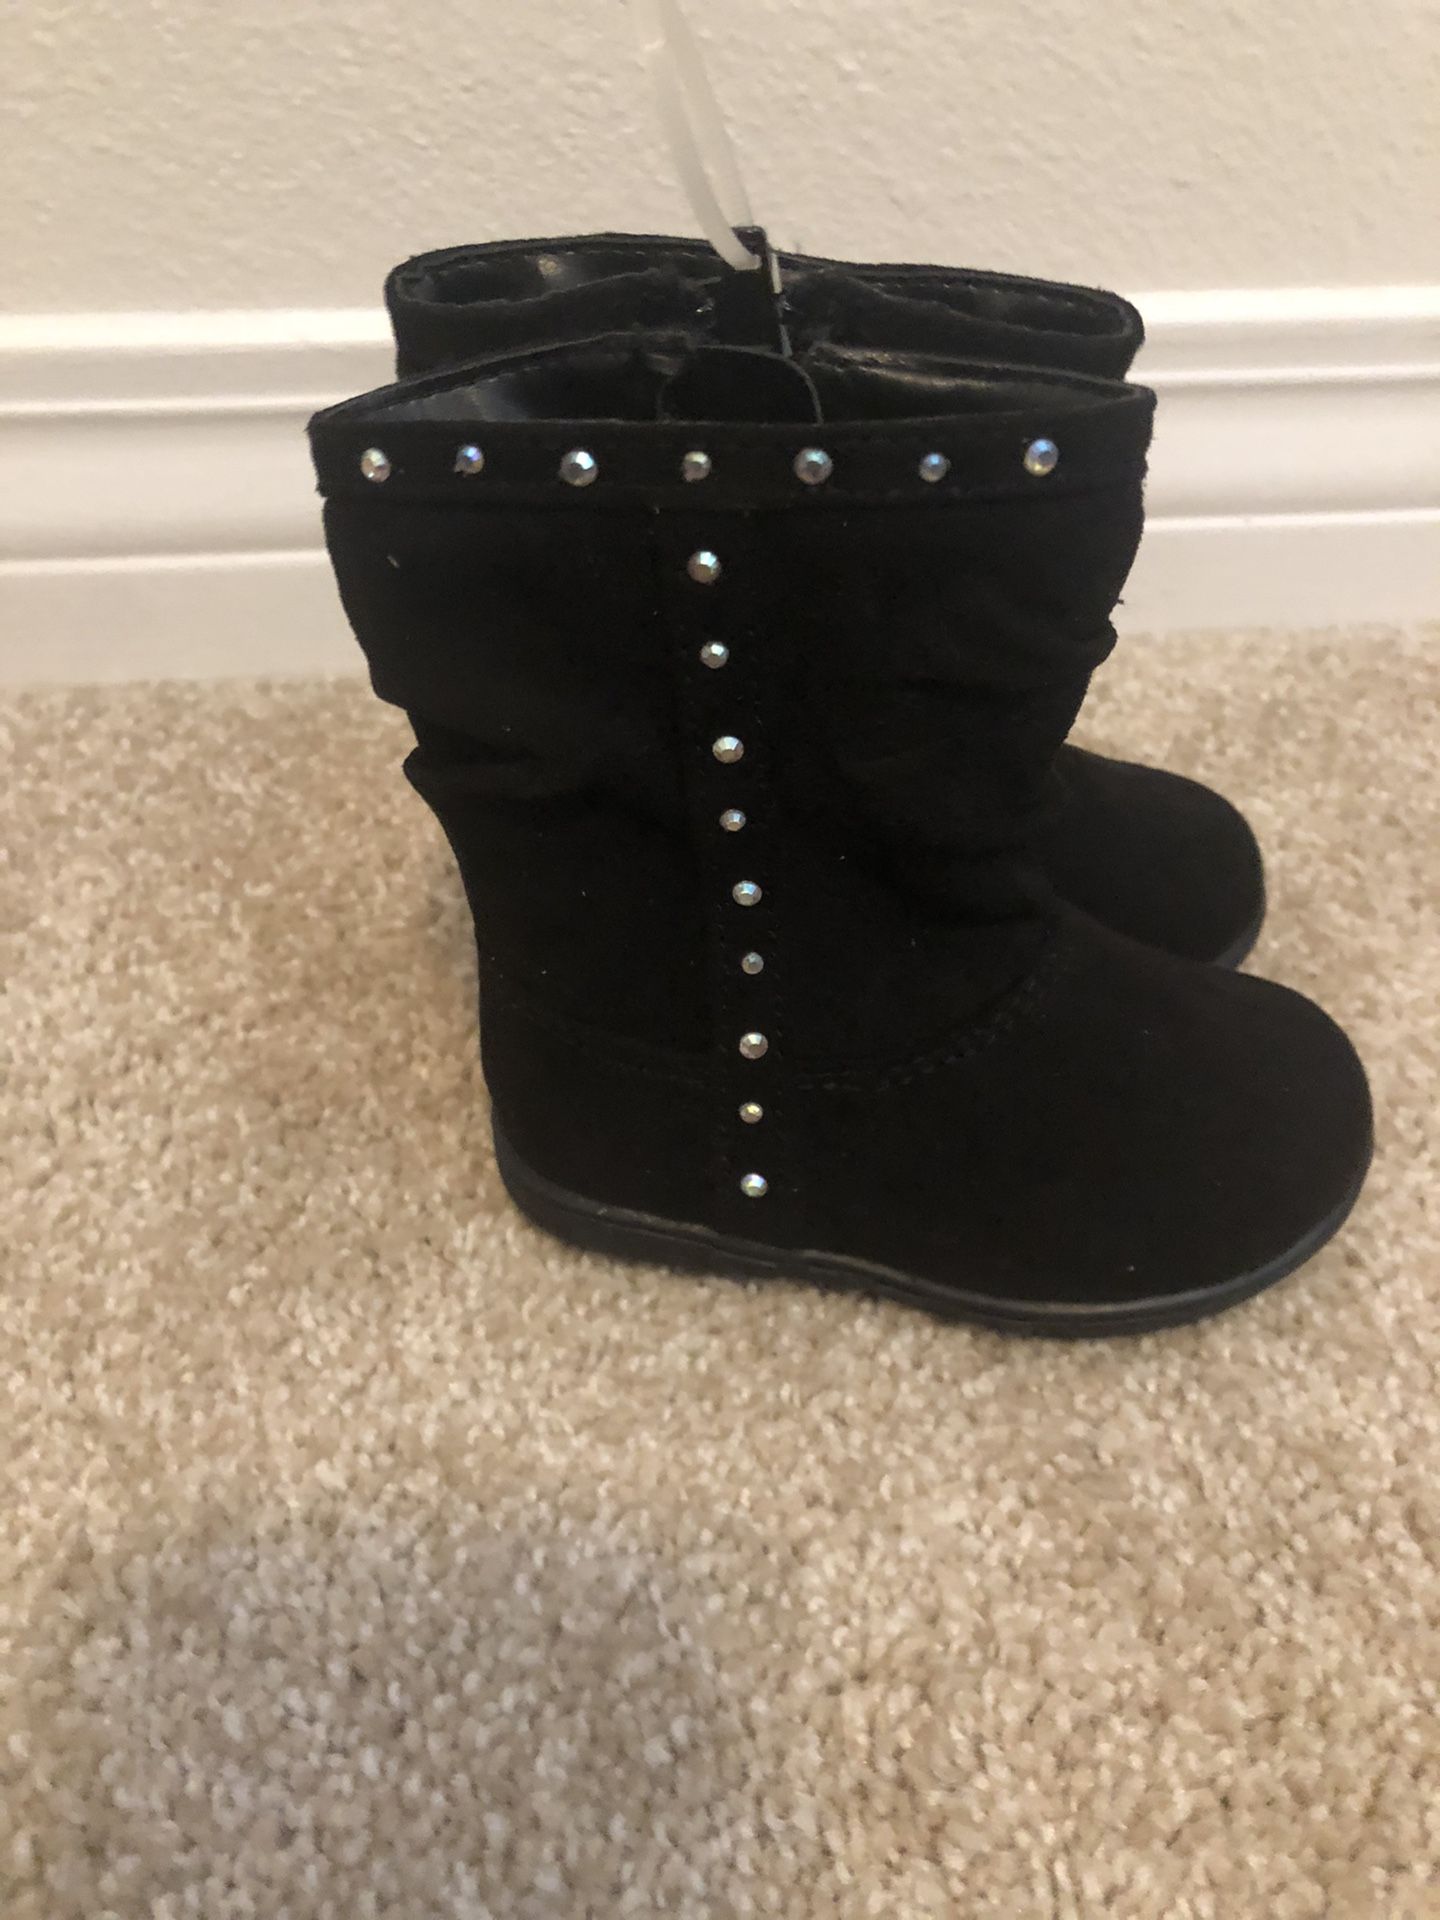 New girls boots